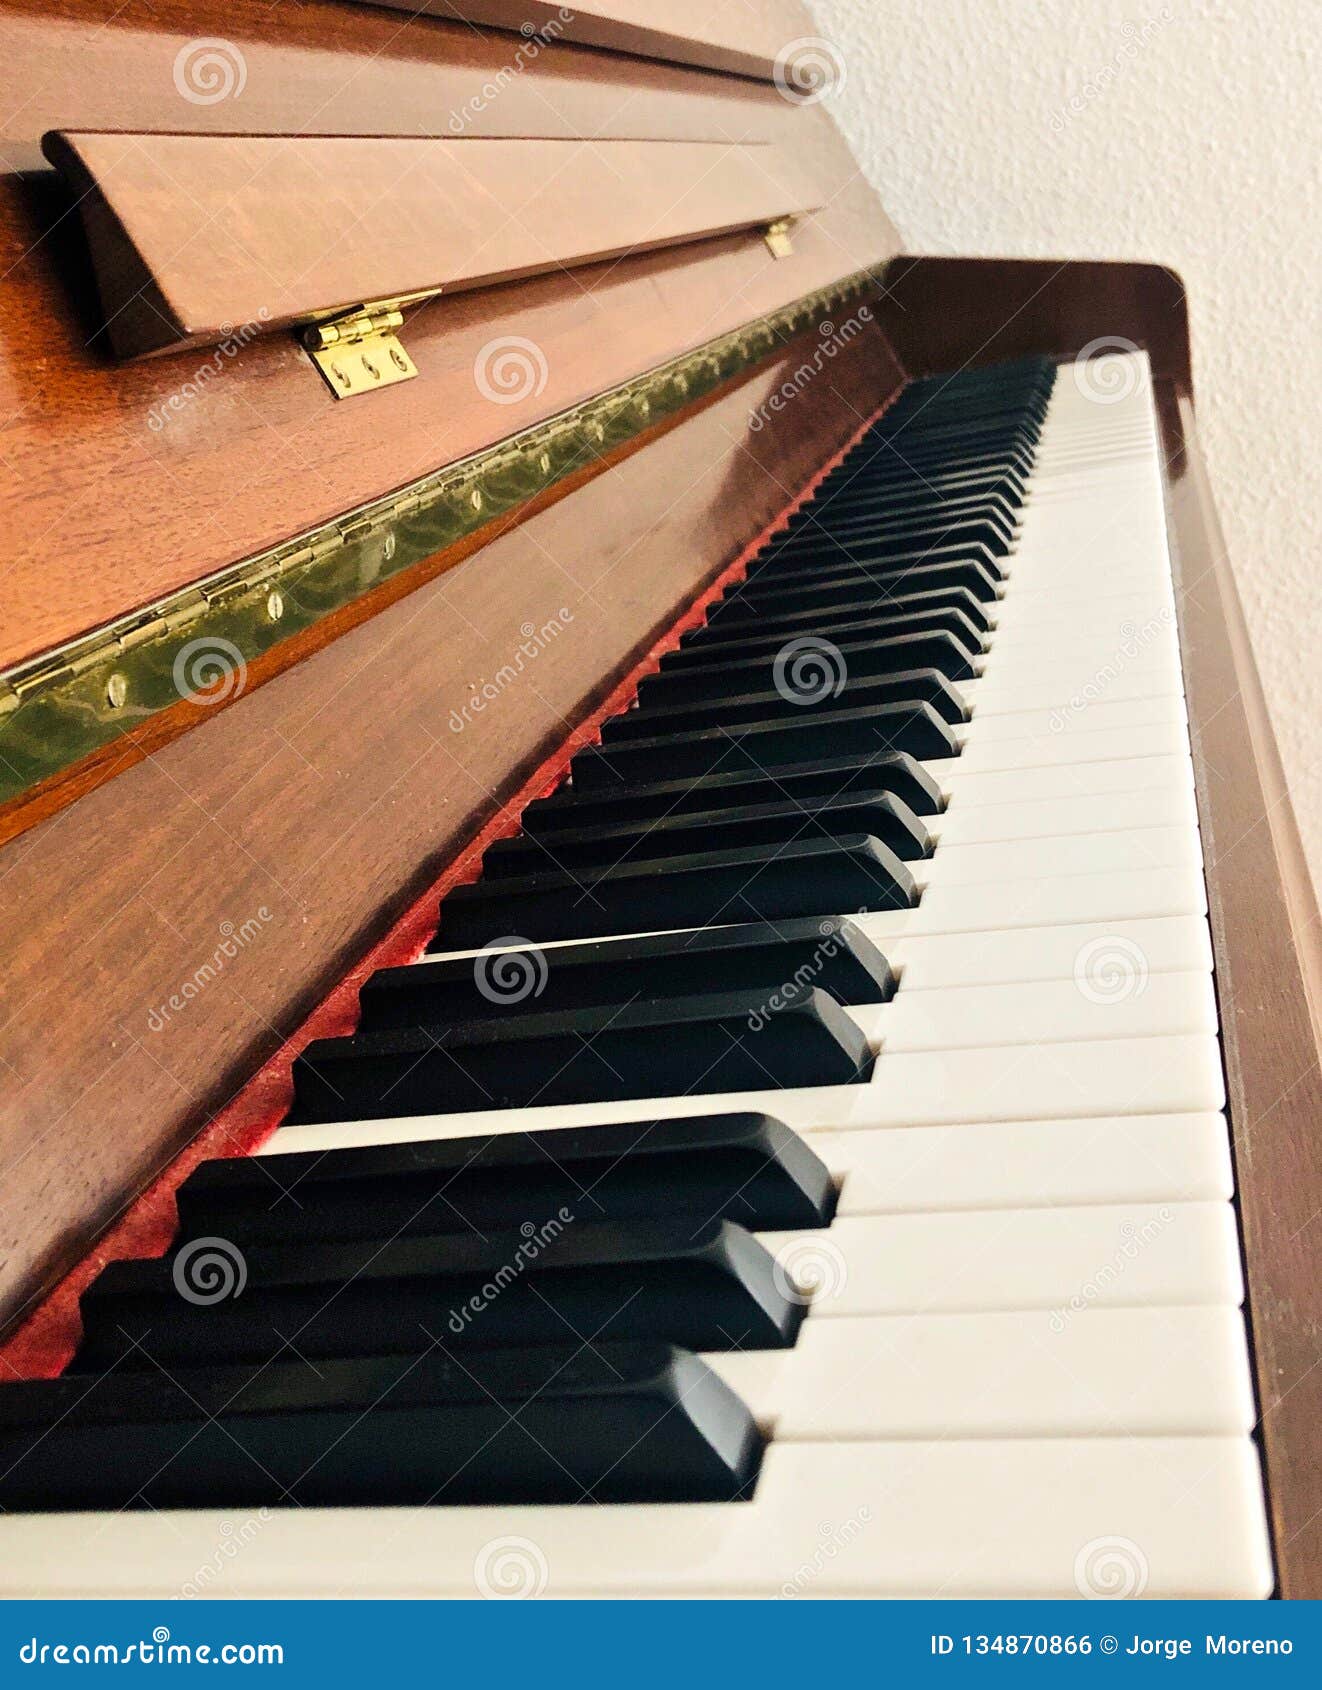 black and white keys of a piano.